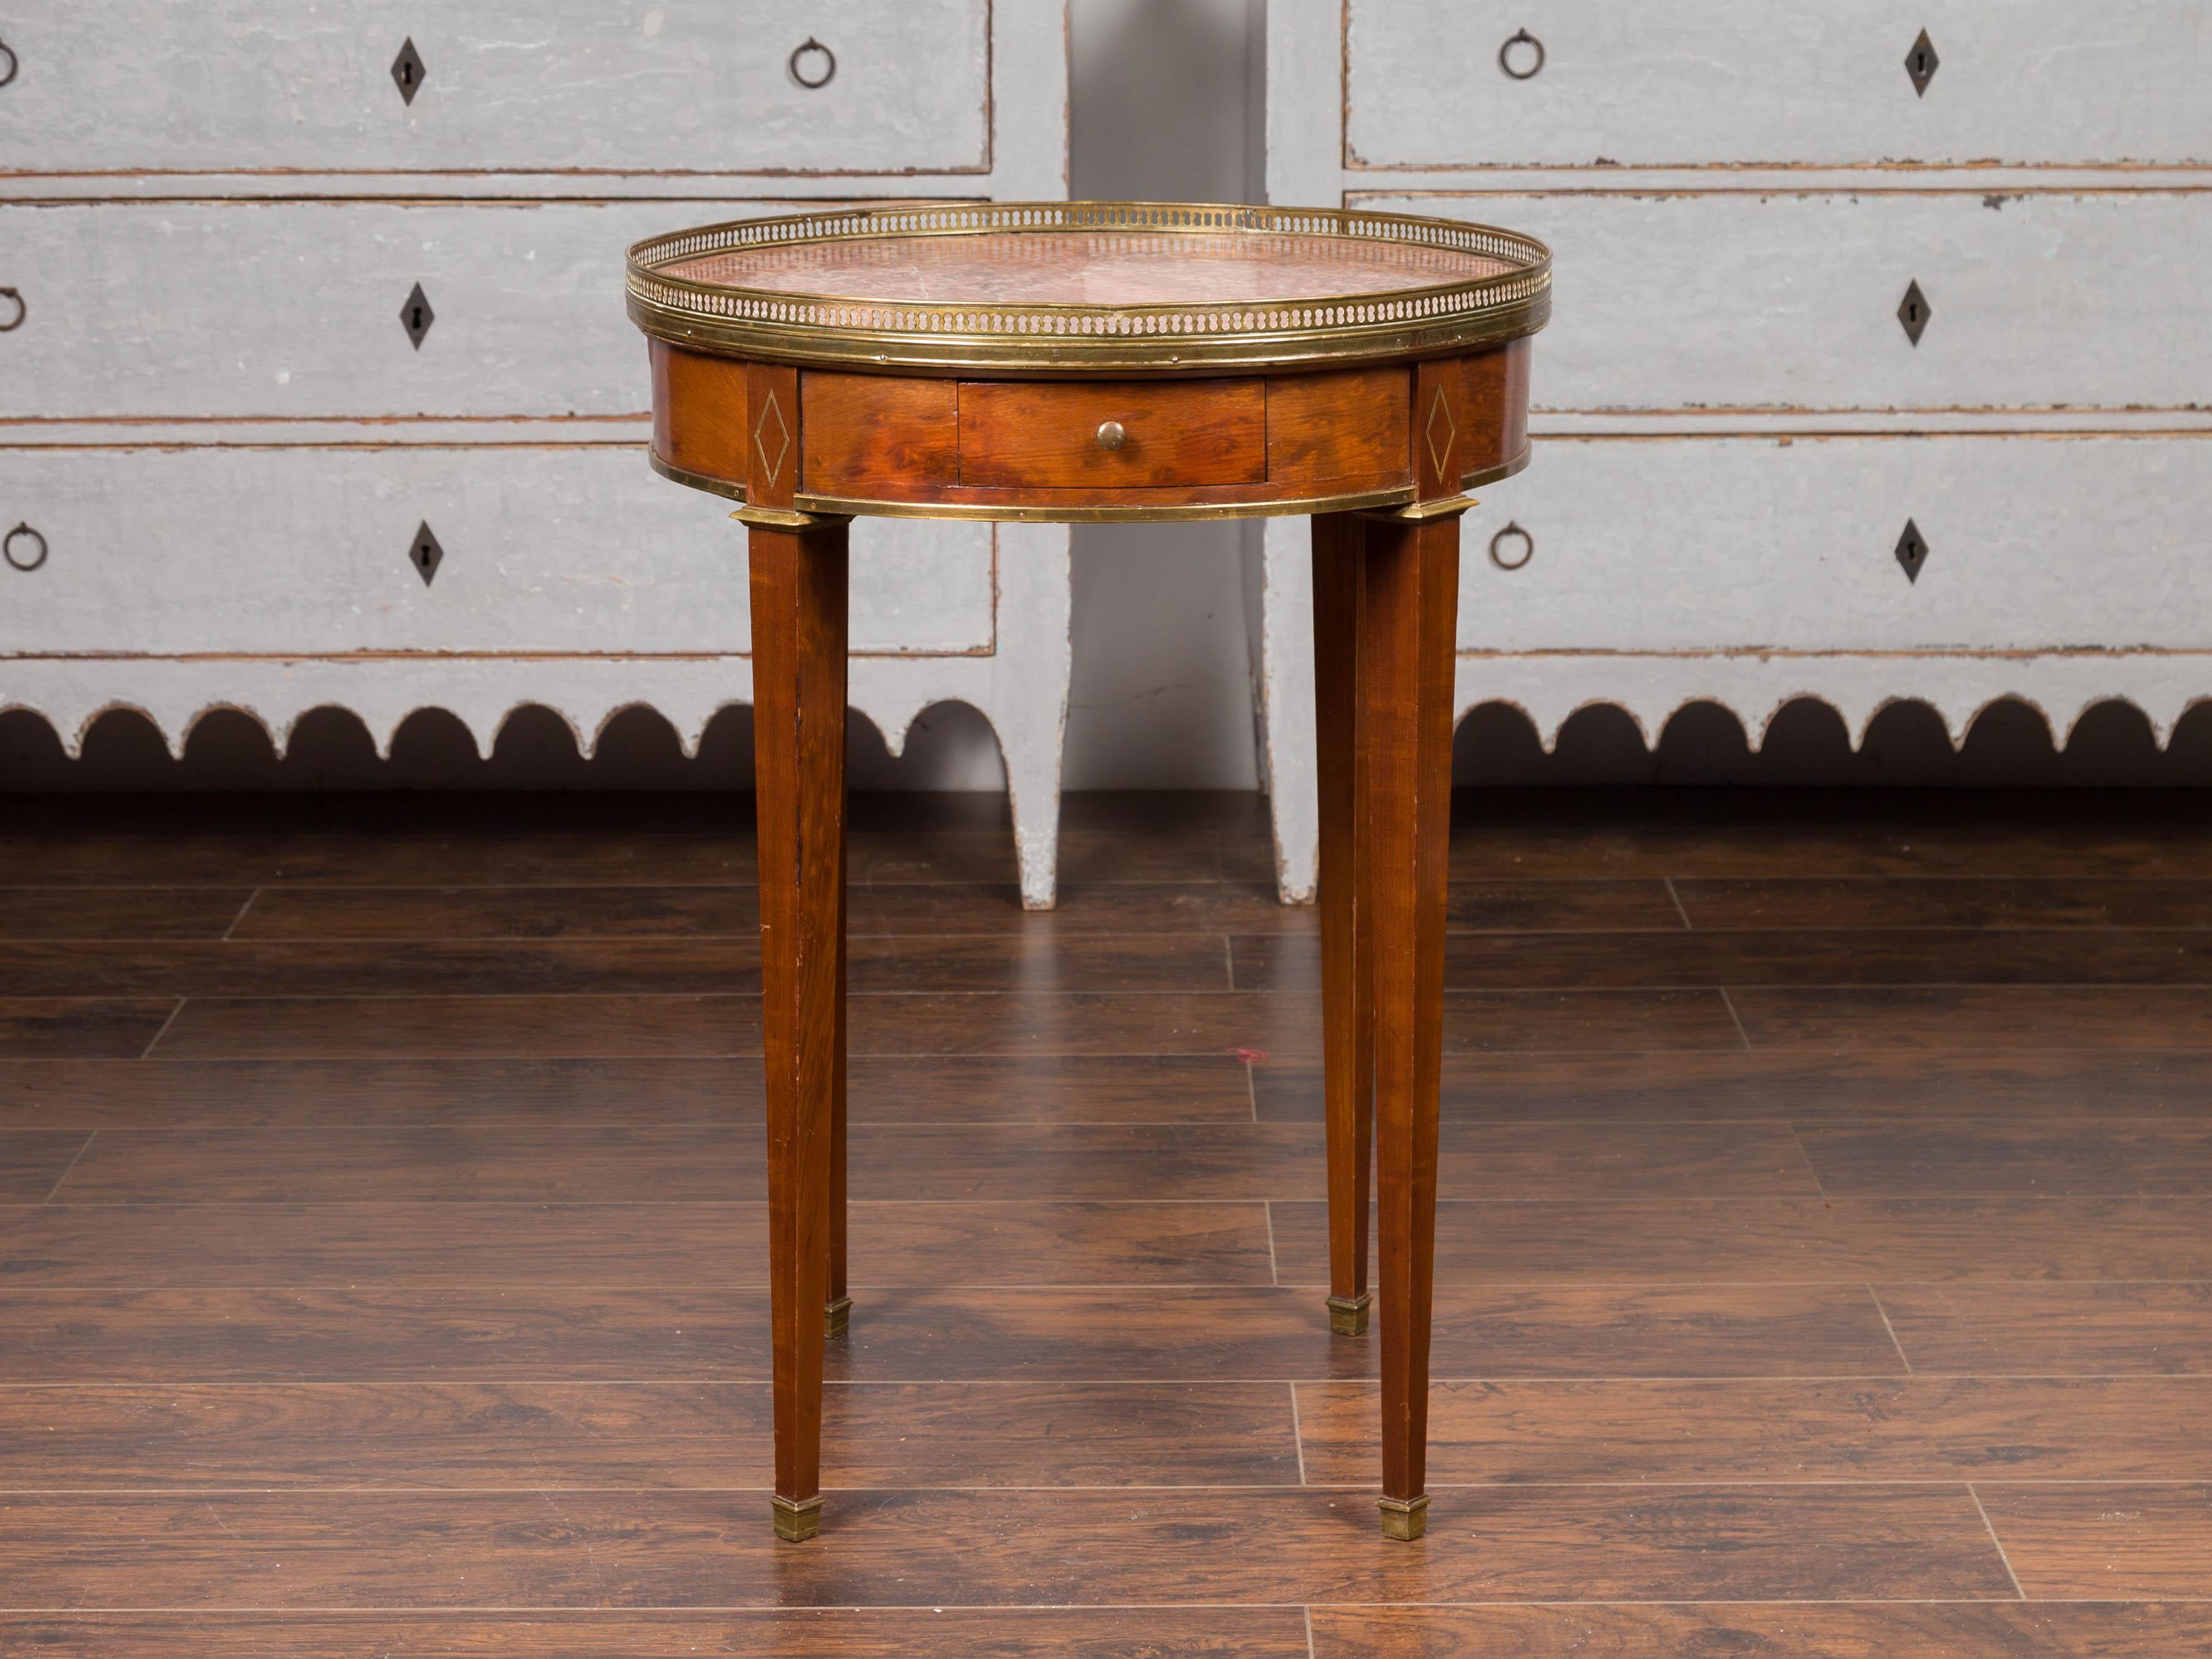 A French Empire style round side table from the late 19th century, with red marble top, single drawer and brass accents. Born in France during the third quarter of the 19th century, this side table features a circular red marble top surrounded by a